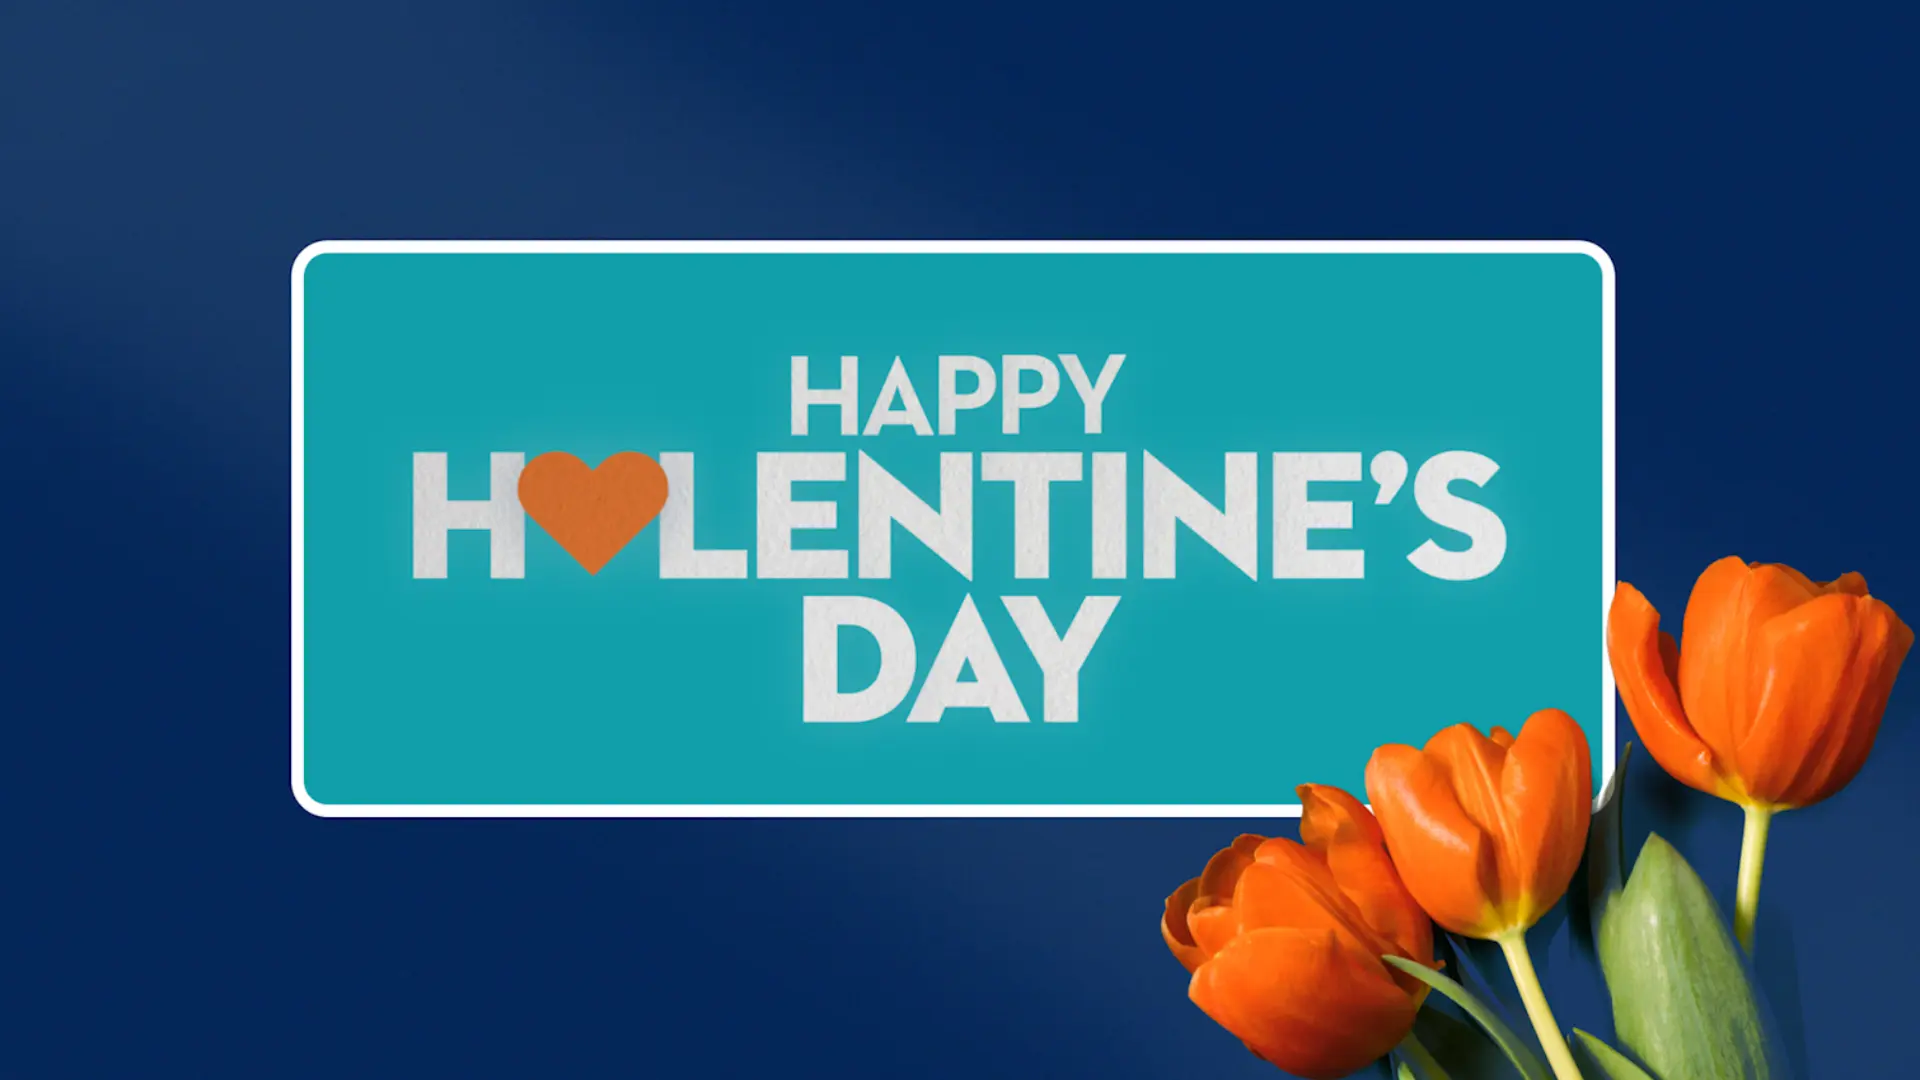 Blue background with orange-colored tulips in honor of Valentine's Day. Text reads: HAPPY HALENTINE'S DAY.